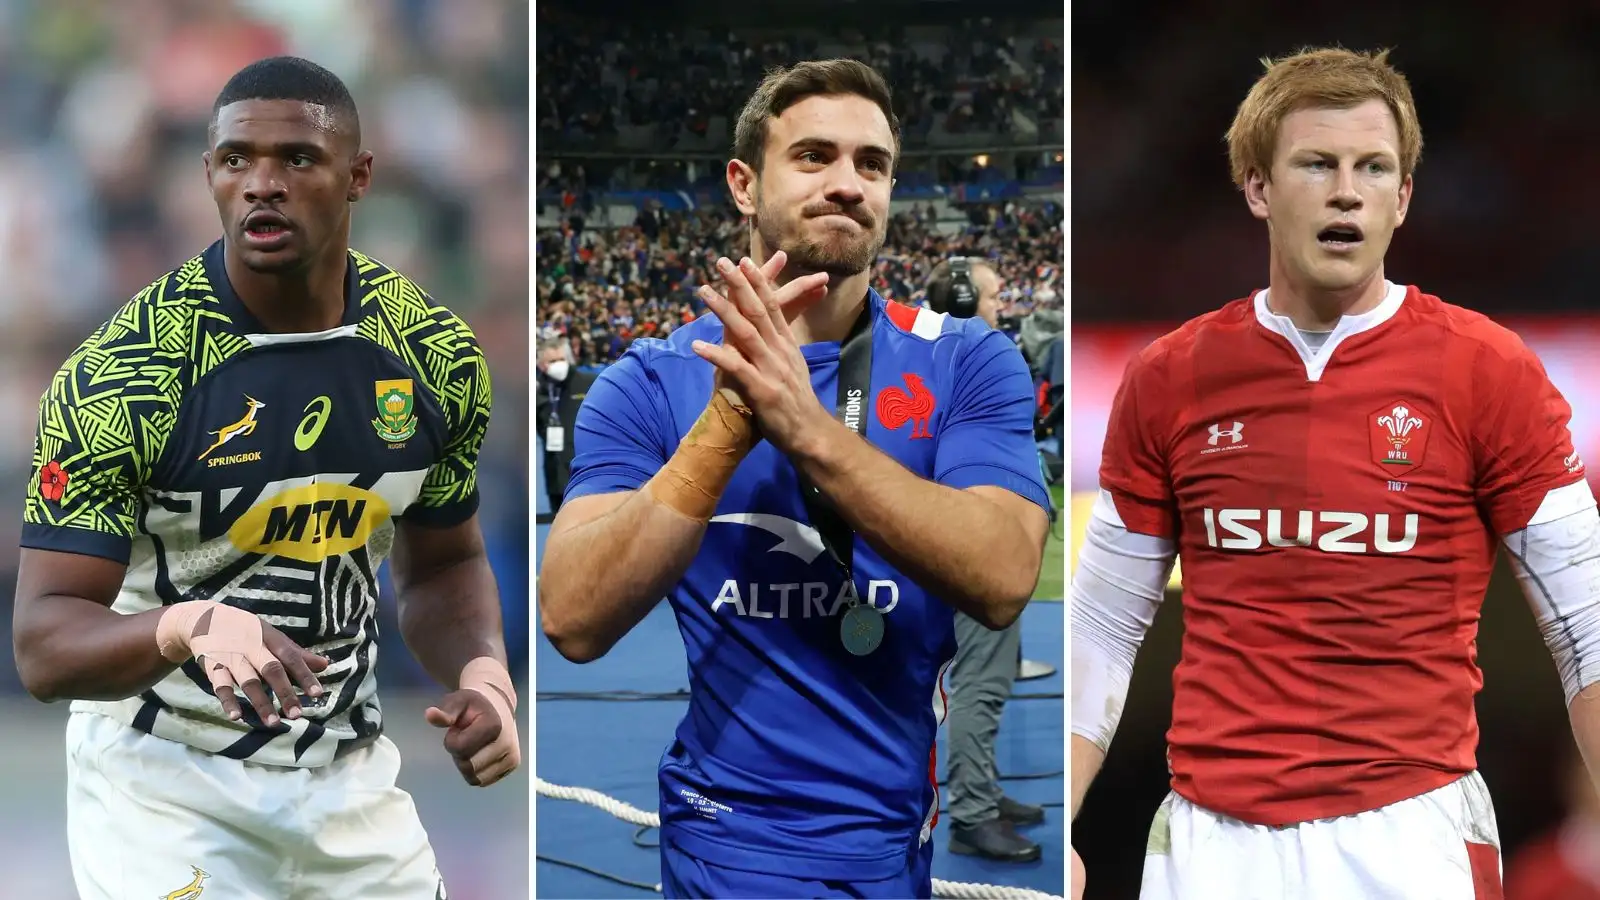 Planet Rugby recaps some of the biggest rugby transfer news and rumours, including Warrick Gelant, Antoine Dupont, Melvyn Jaminet, Rhys Patchell and more.